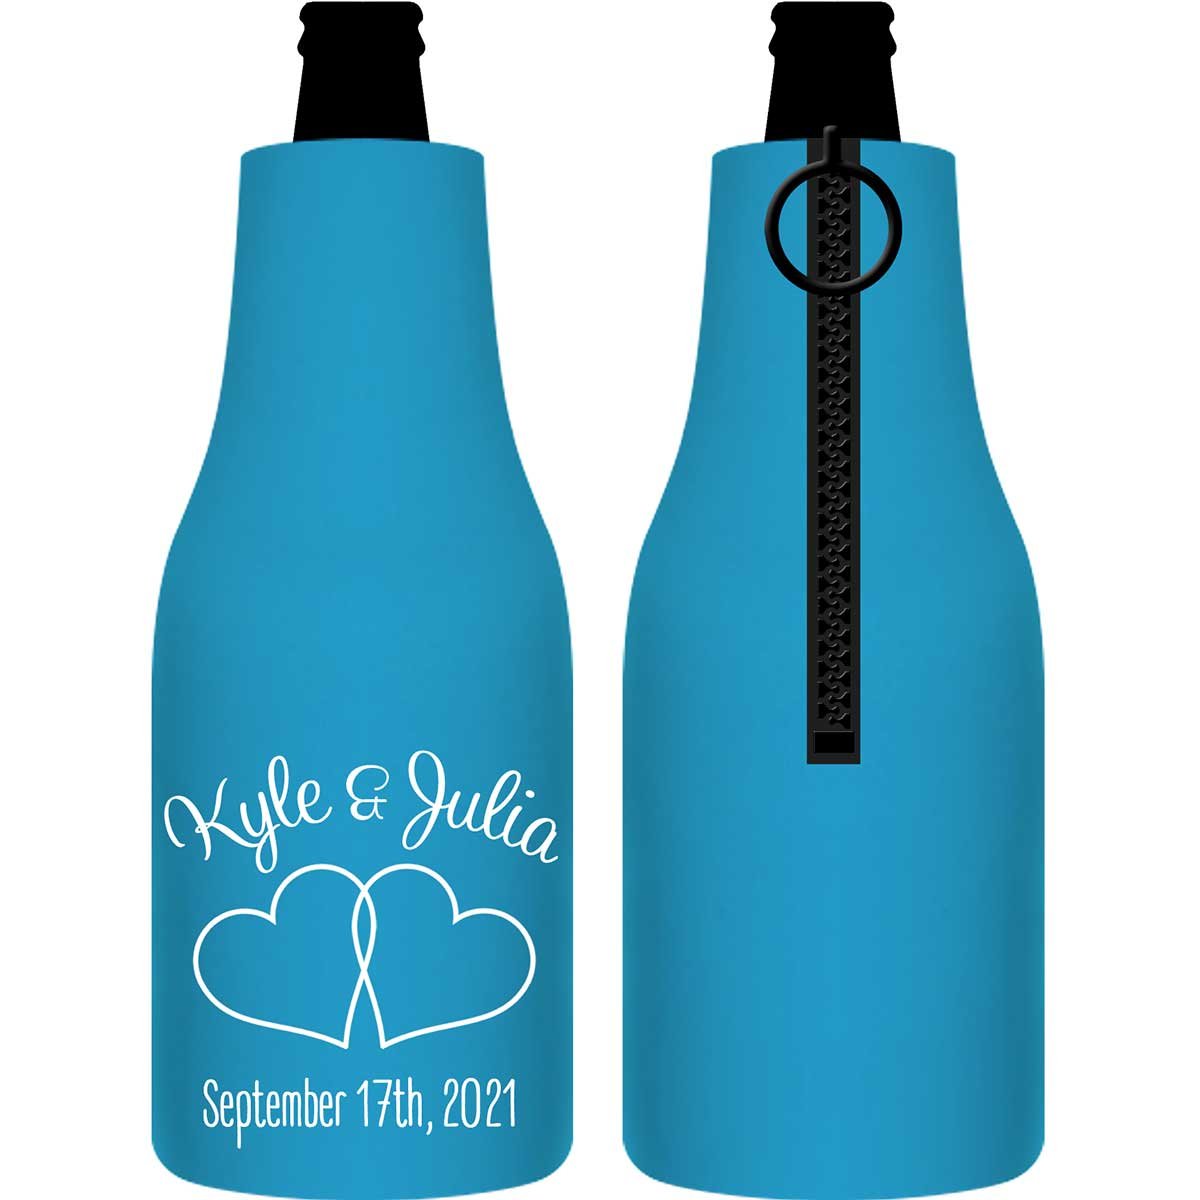 Intertwined Hearts 5A Foldable Zippered Bottle Koozies Wedding Gifts for Guests